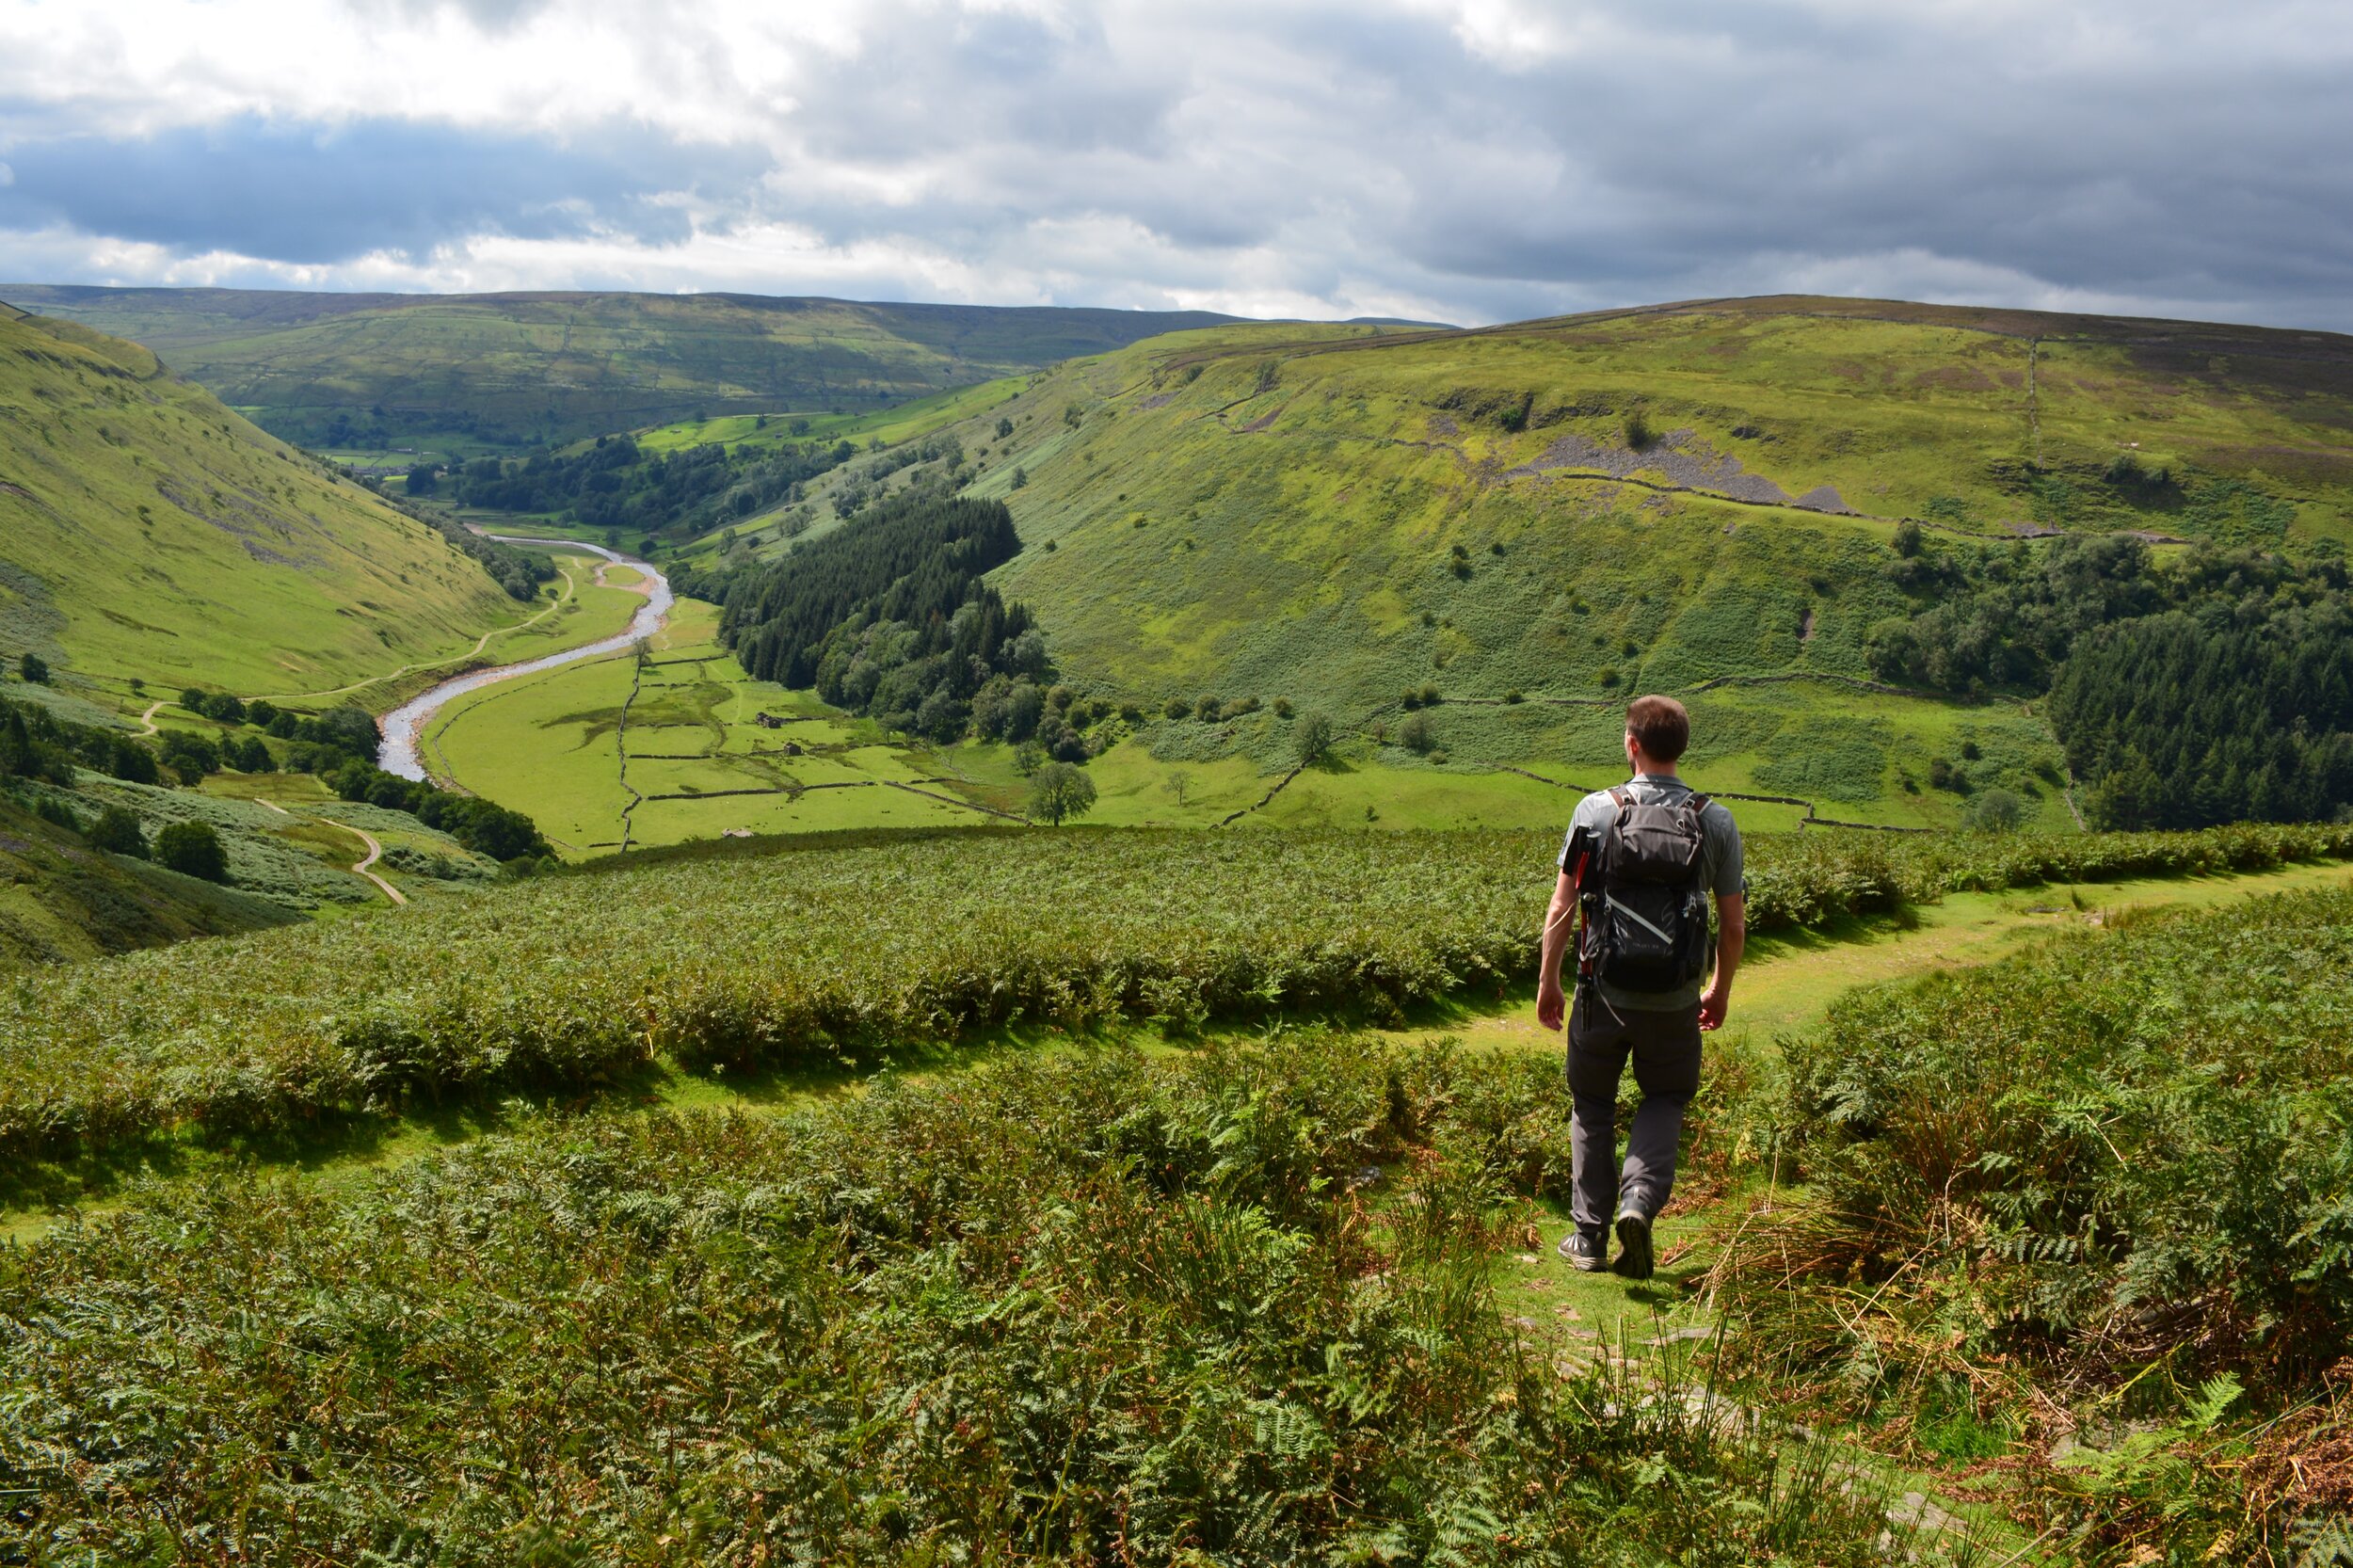 guided tours of the yorkshire dales